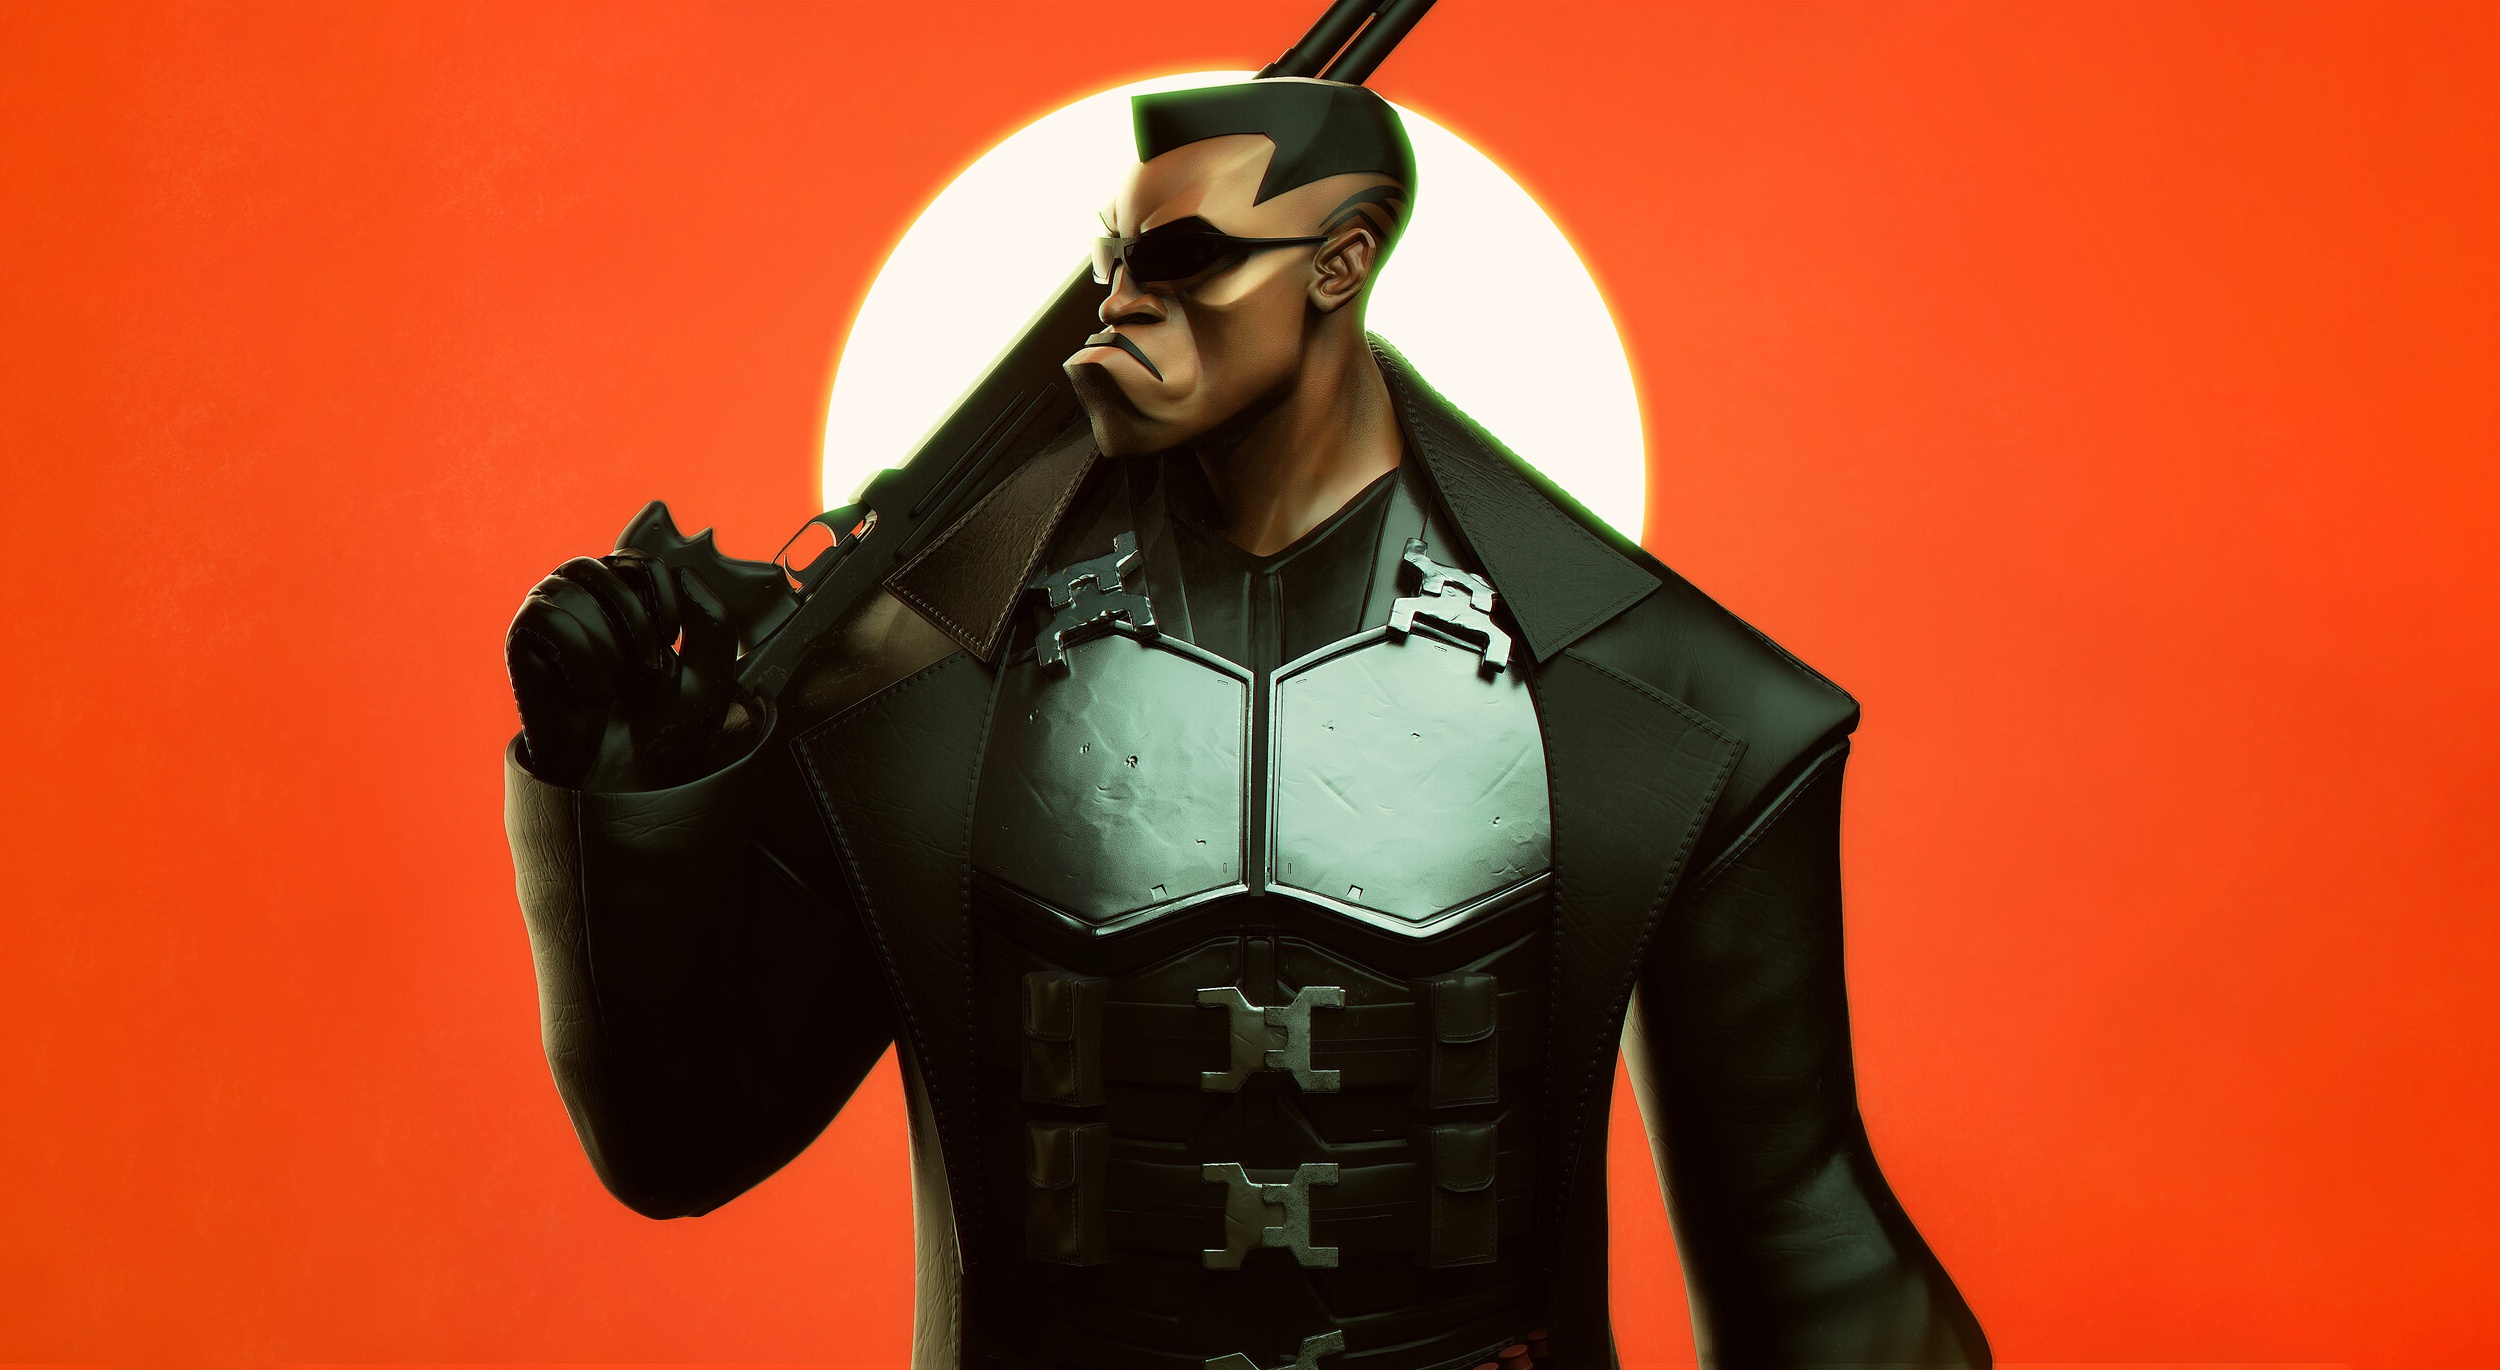 Blade Movie Wallpapers